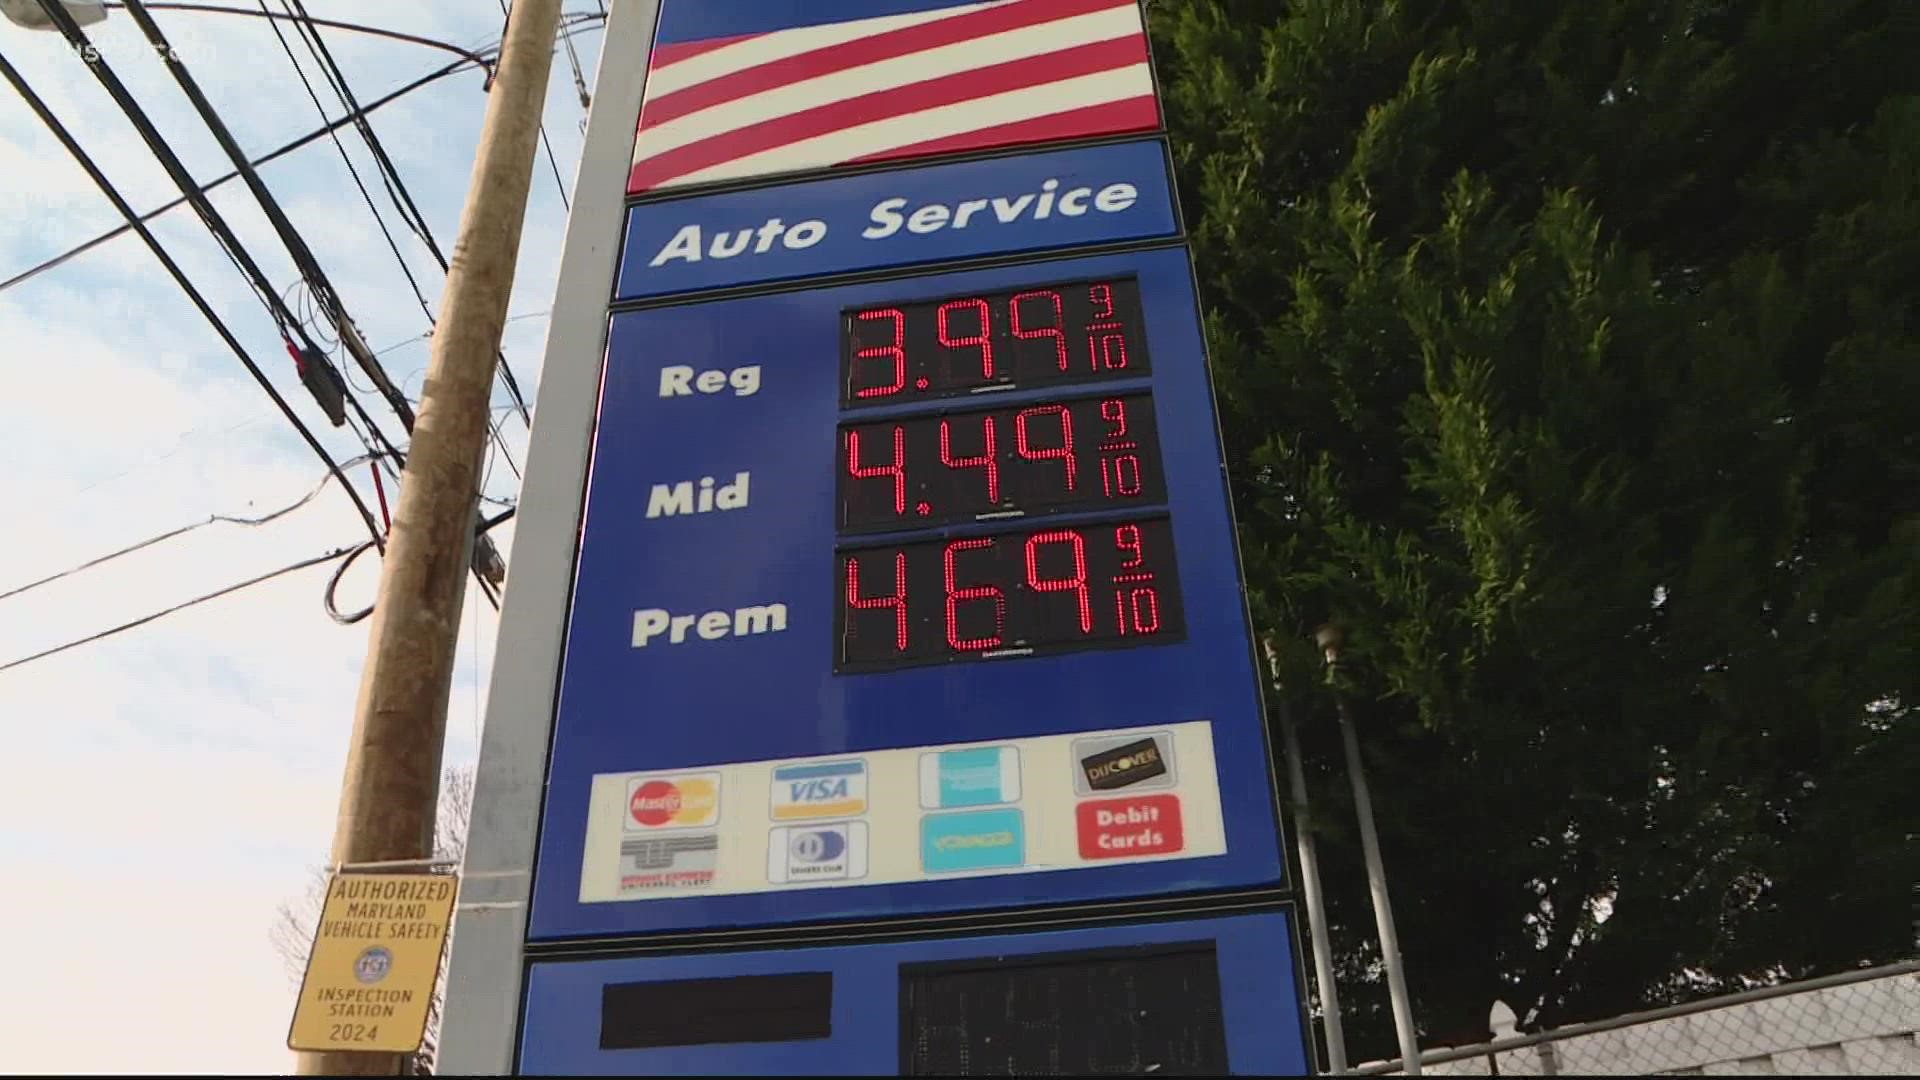 Gas price in usa